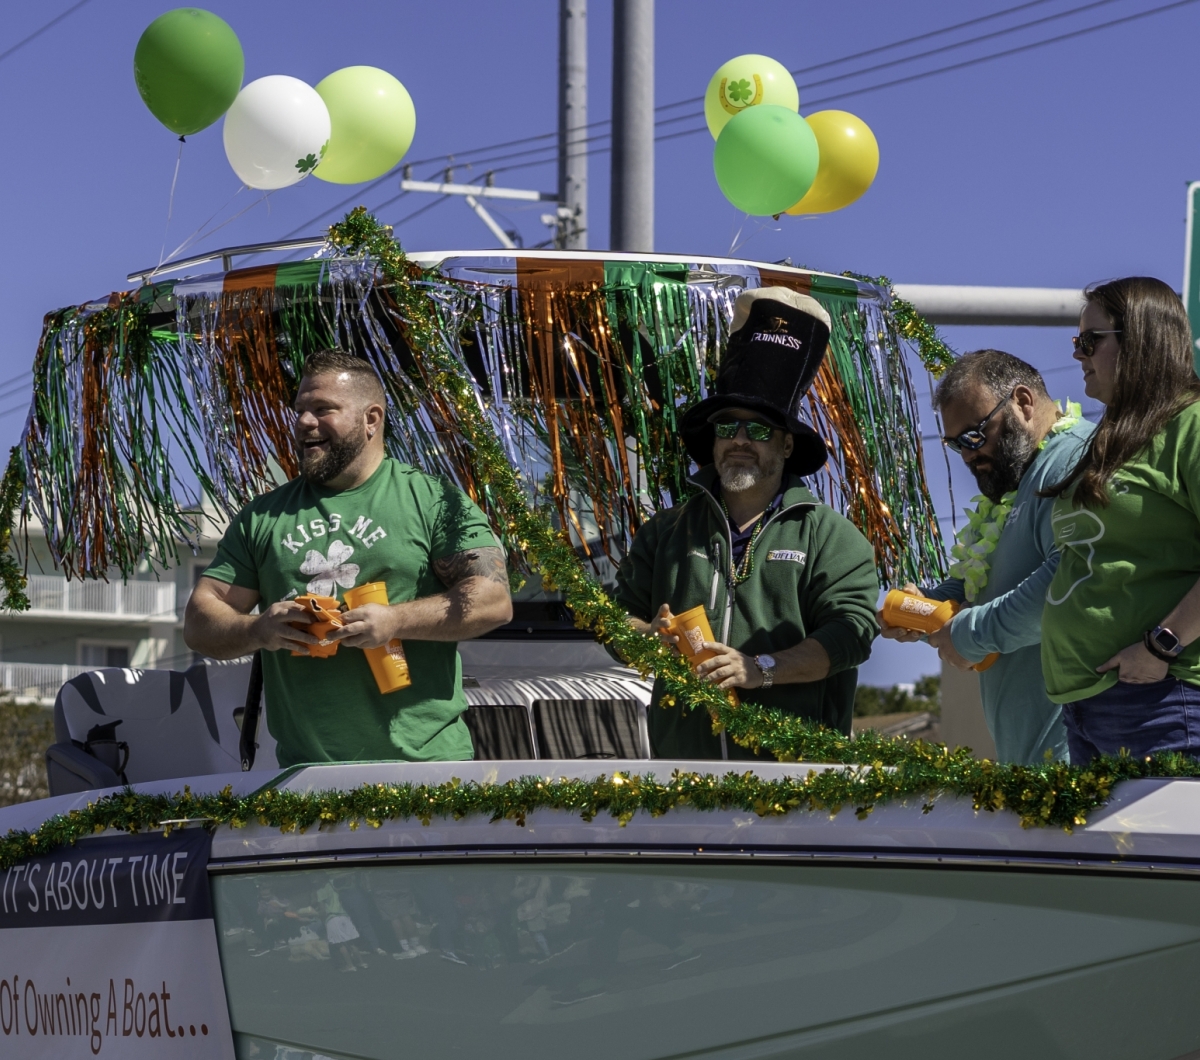 A decorated boat Float in St. Patrick's Day Parade